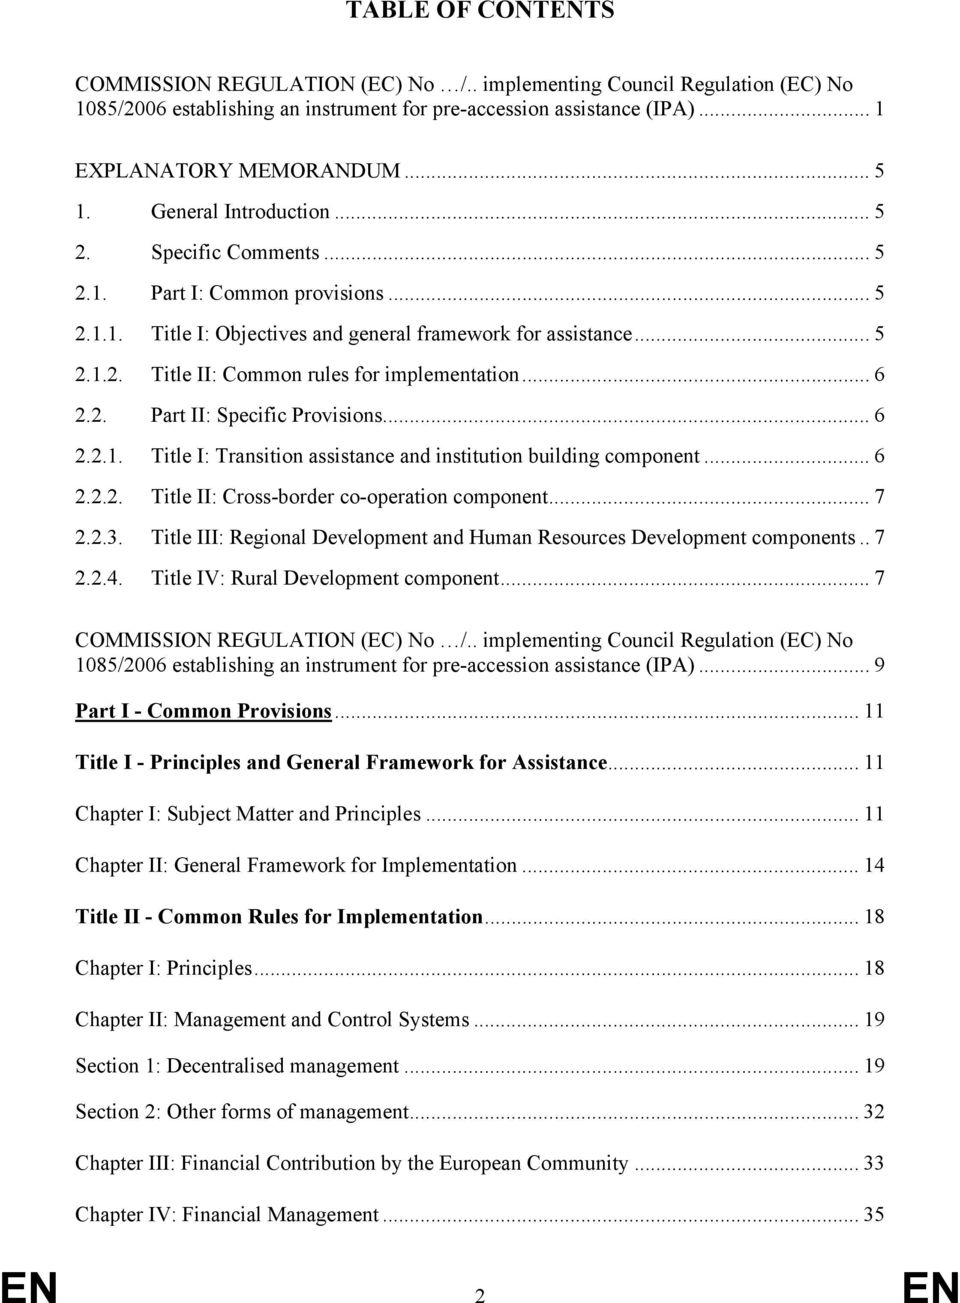 .. 6 2.2. Part II: Specific Provisions... 6 2.2.1. Title I: Transition assistance and institution building component... 6 2.2.2. Title II: Cross-border co-operation component... 7 2.2.3.